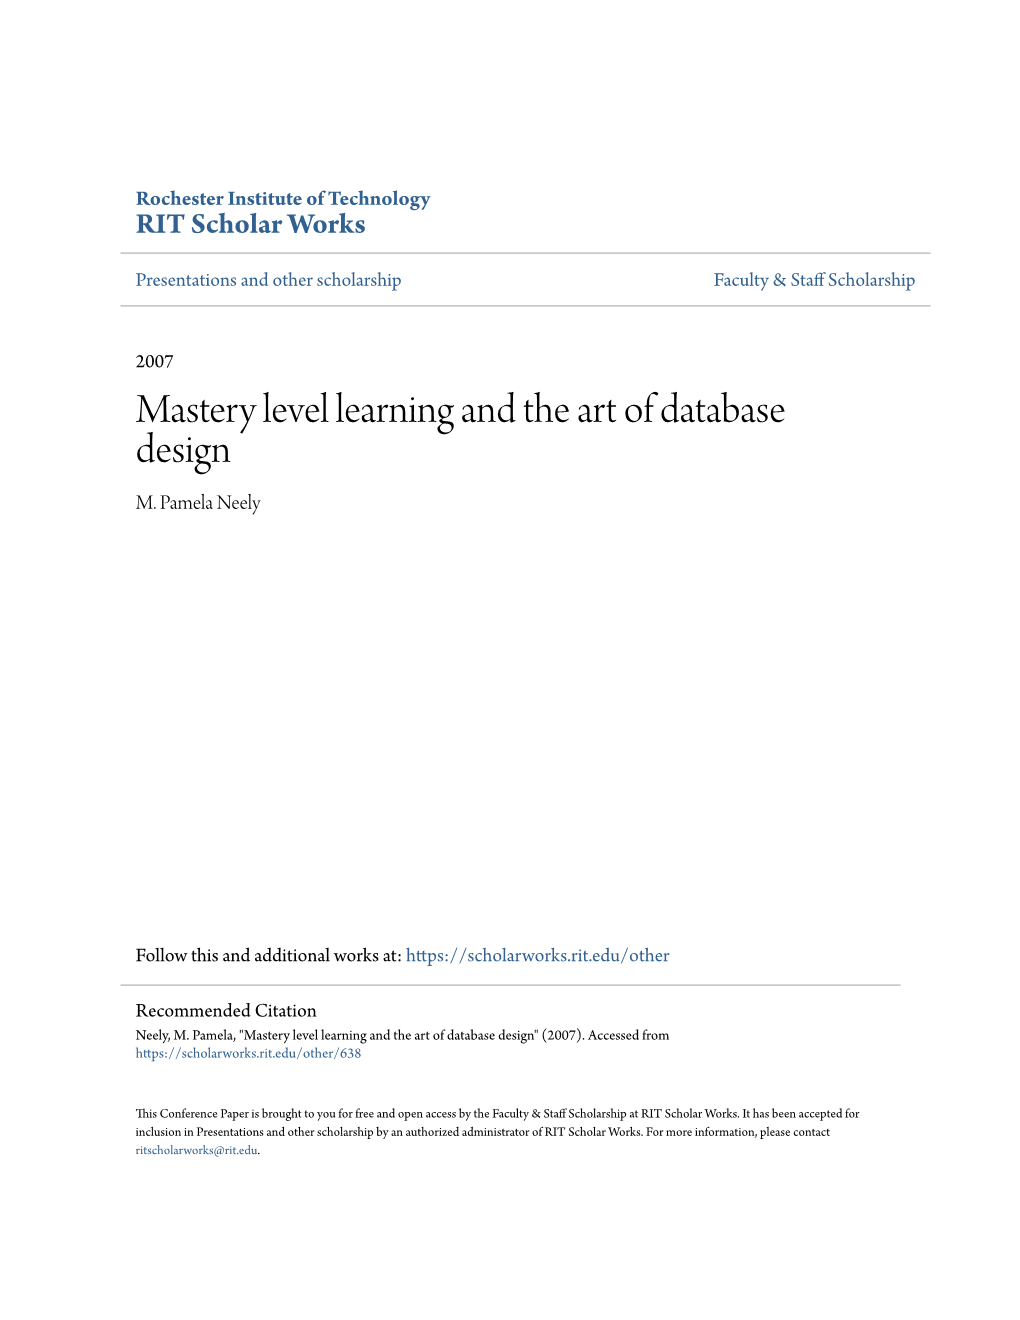 Mastery Level Learning and the Art of Database Design M